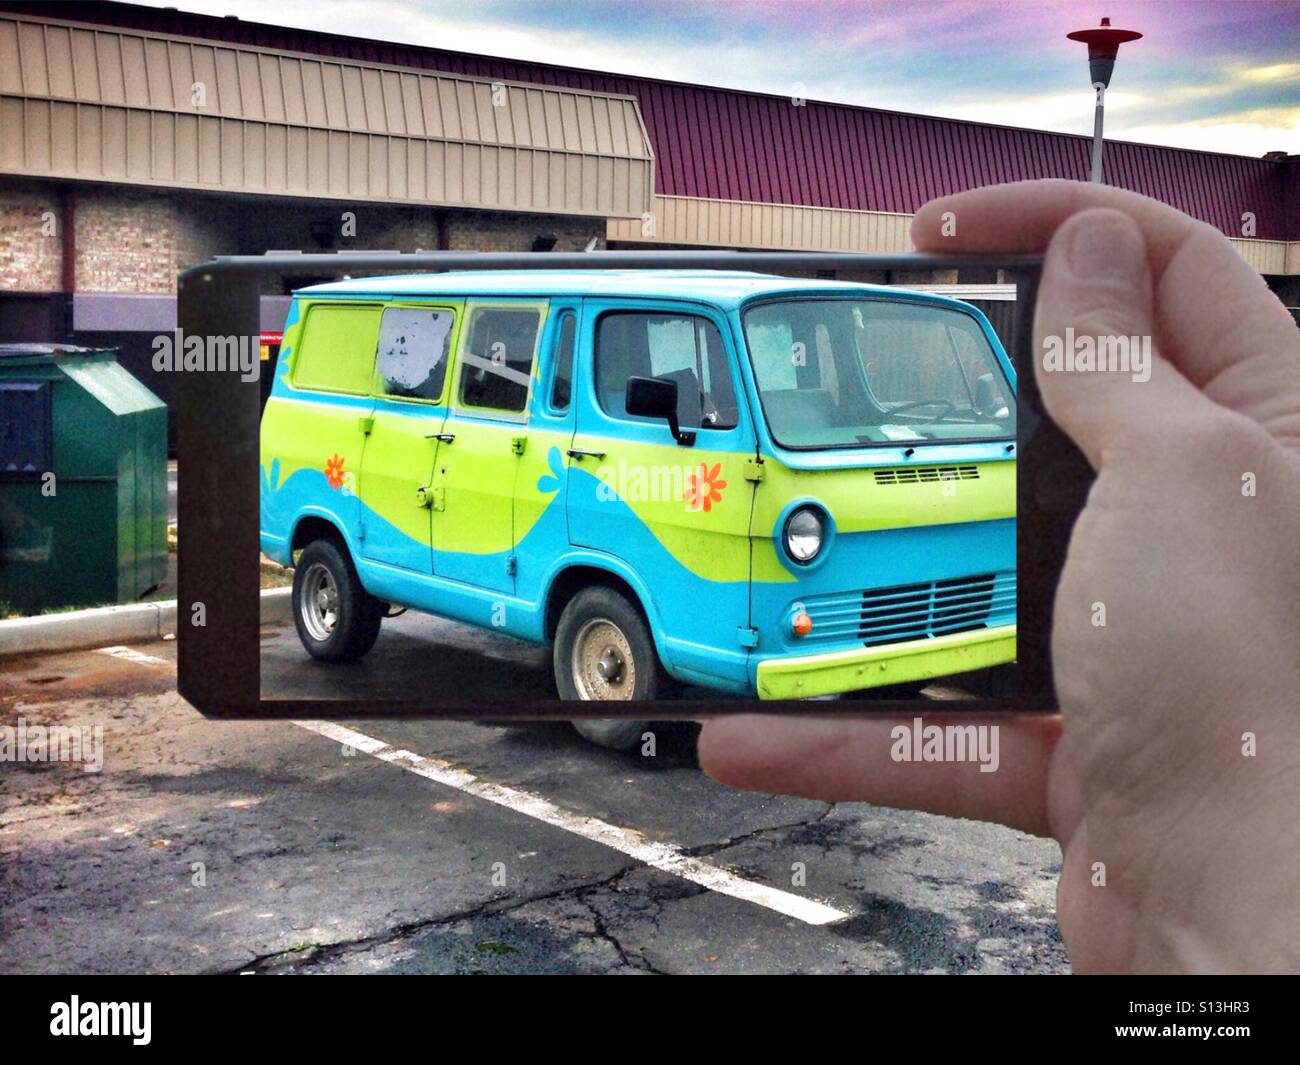 Taking a photograph with my mobile device of a colorfully painted van. Stock Photo